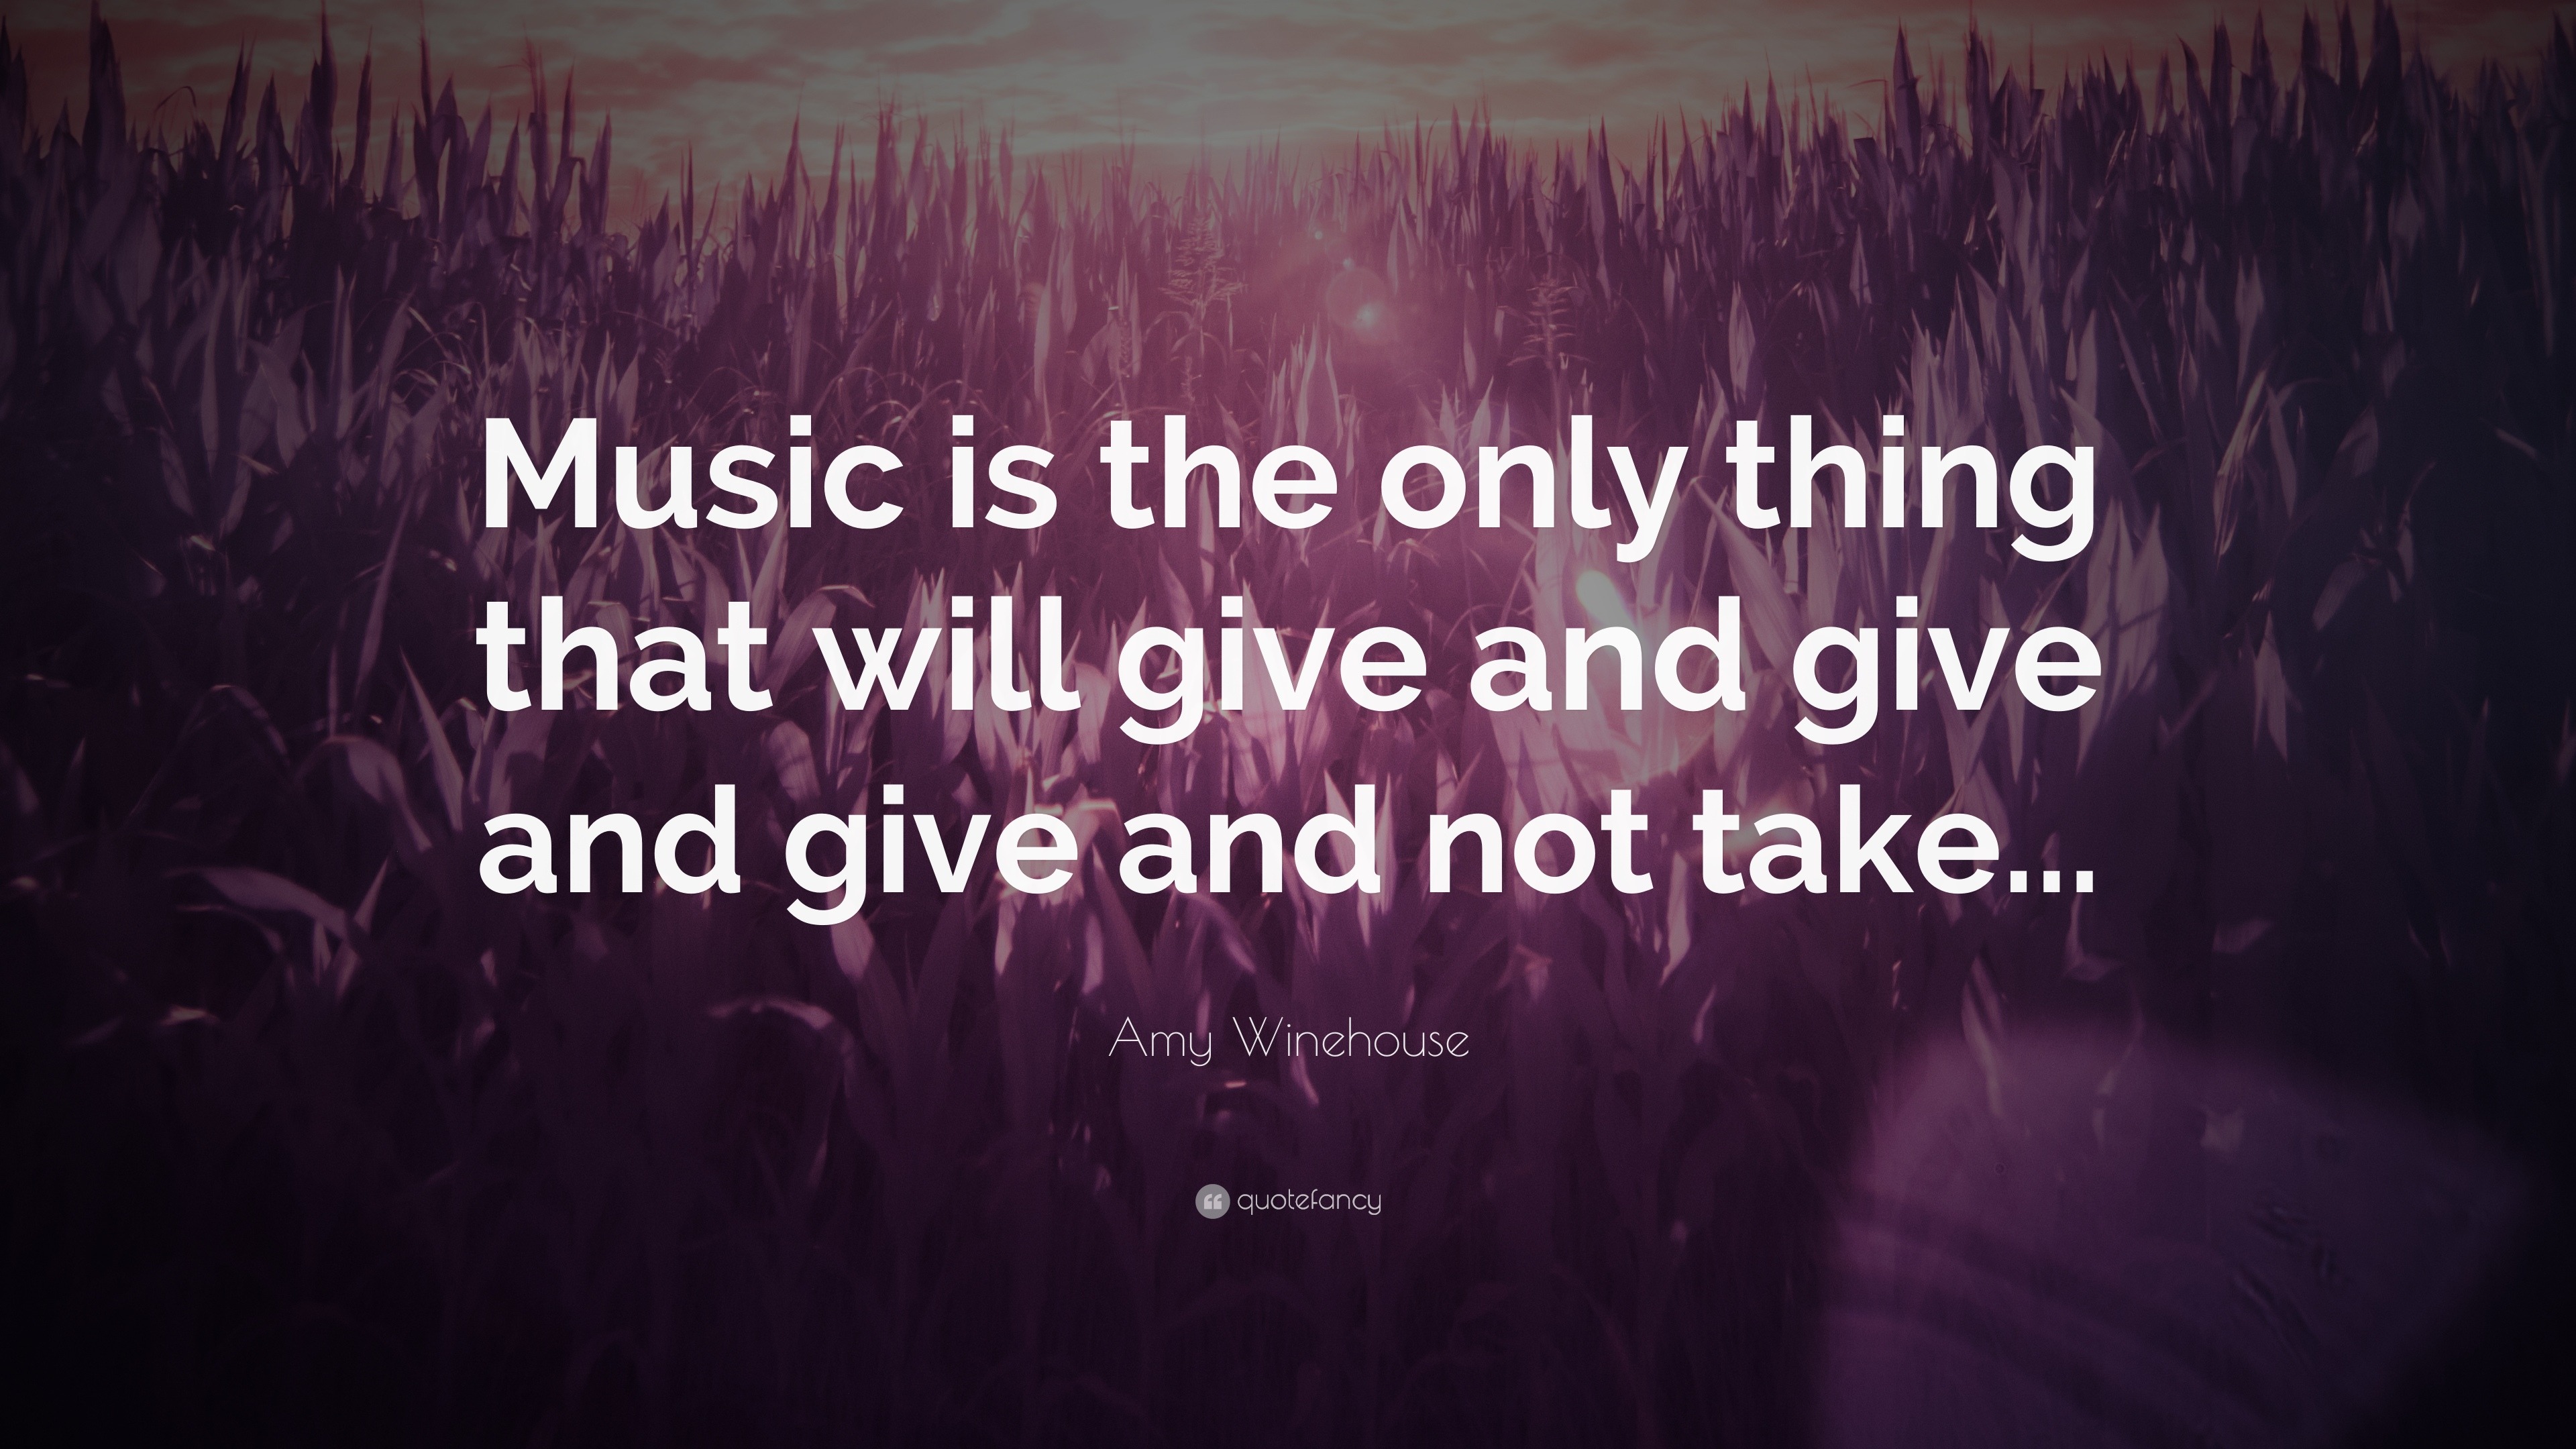 Amy Winehouse Quote Music Is The Only Thing That Will Give And Give And Give And Not Take 7 Wallpapers Quotefancy